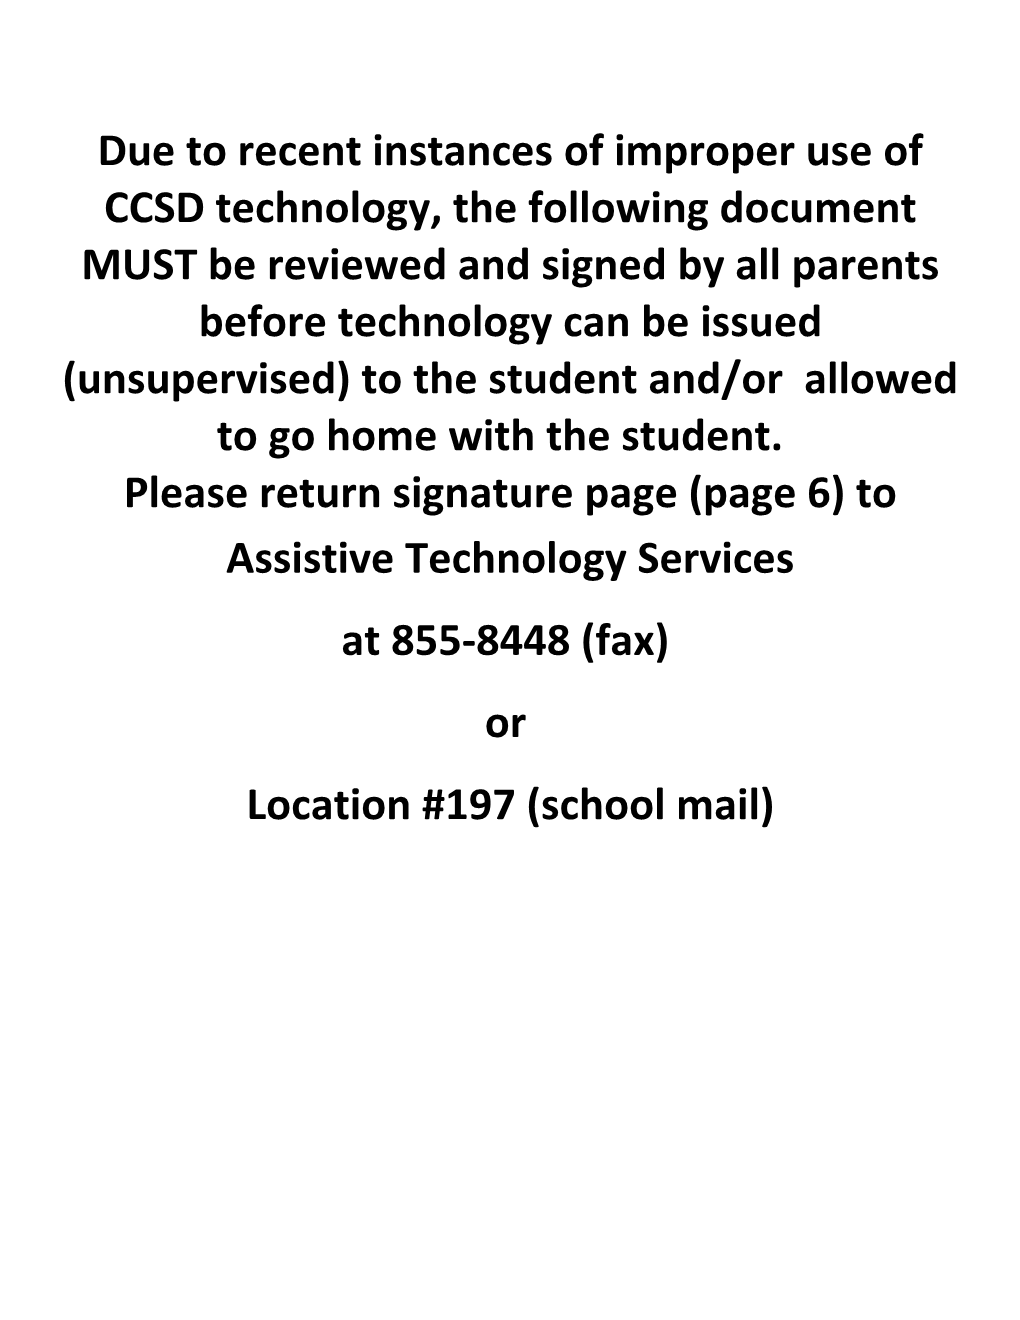 Please Return Signature Page (Page 6) to Assistive Technology Services